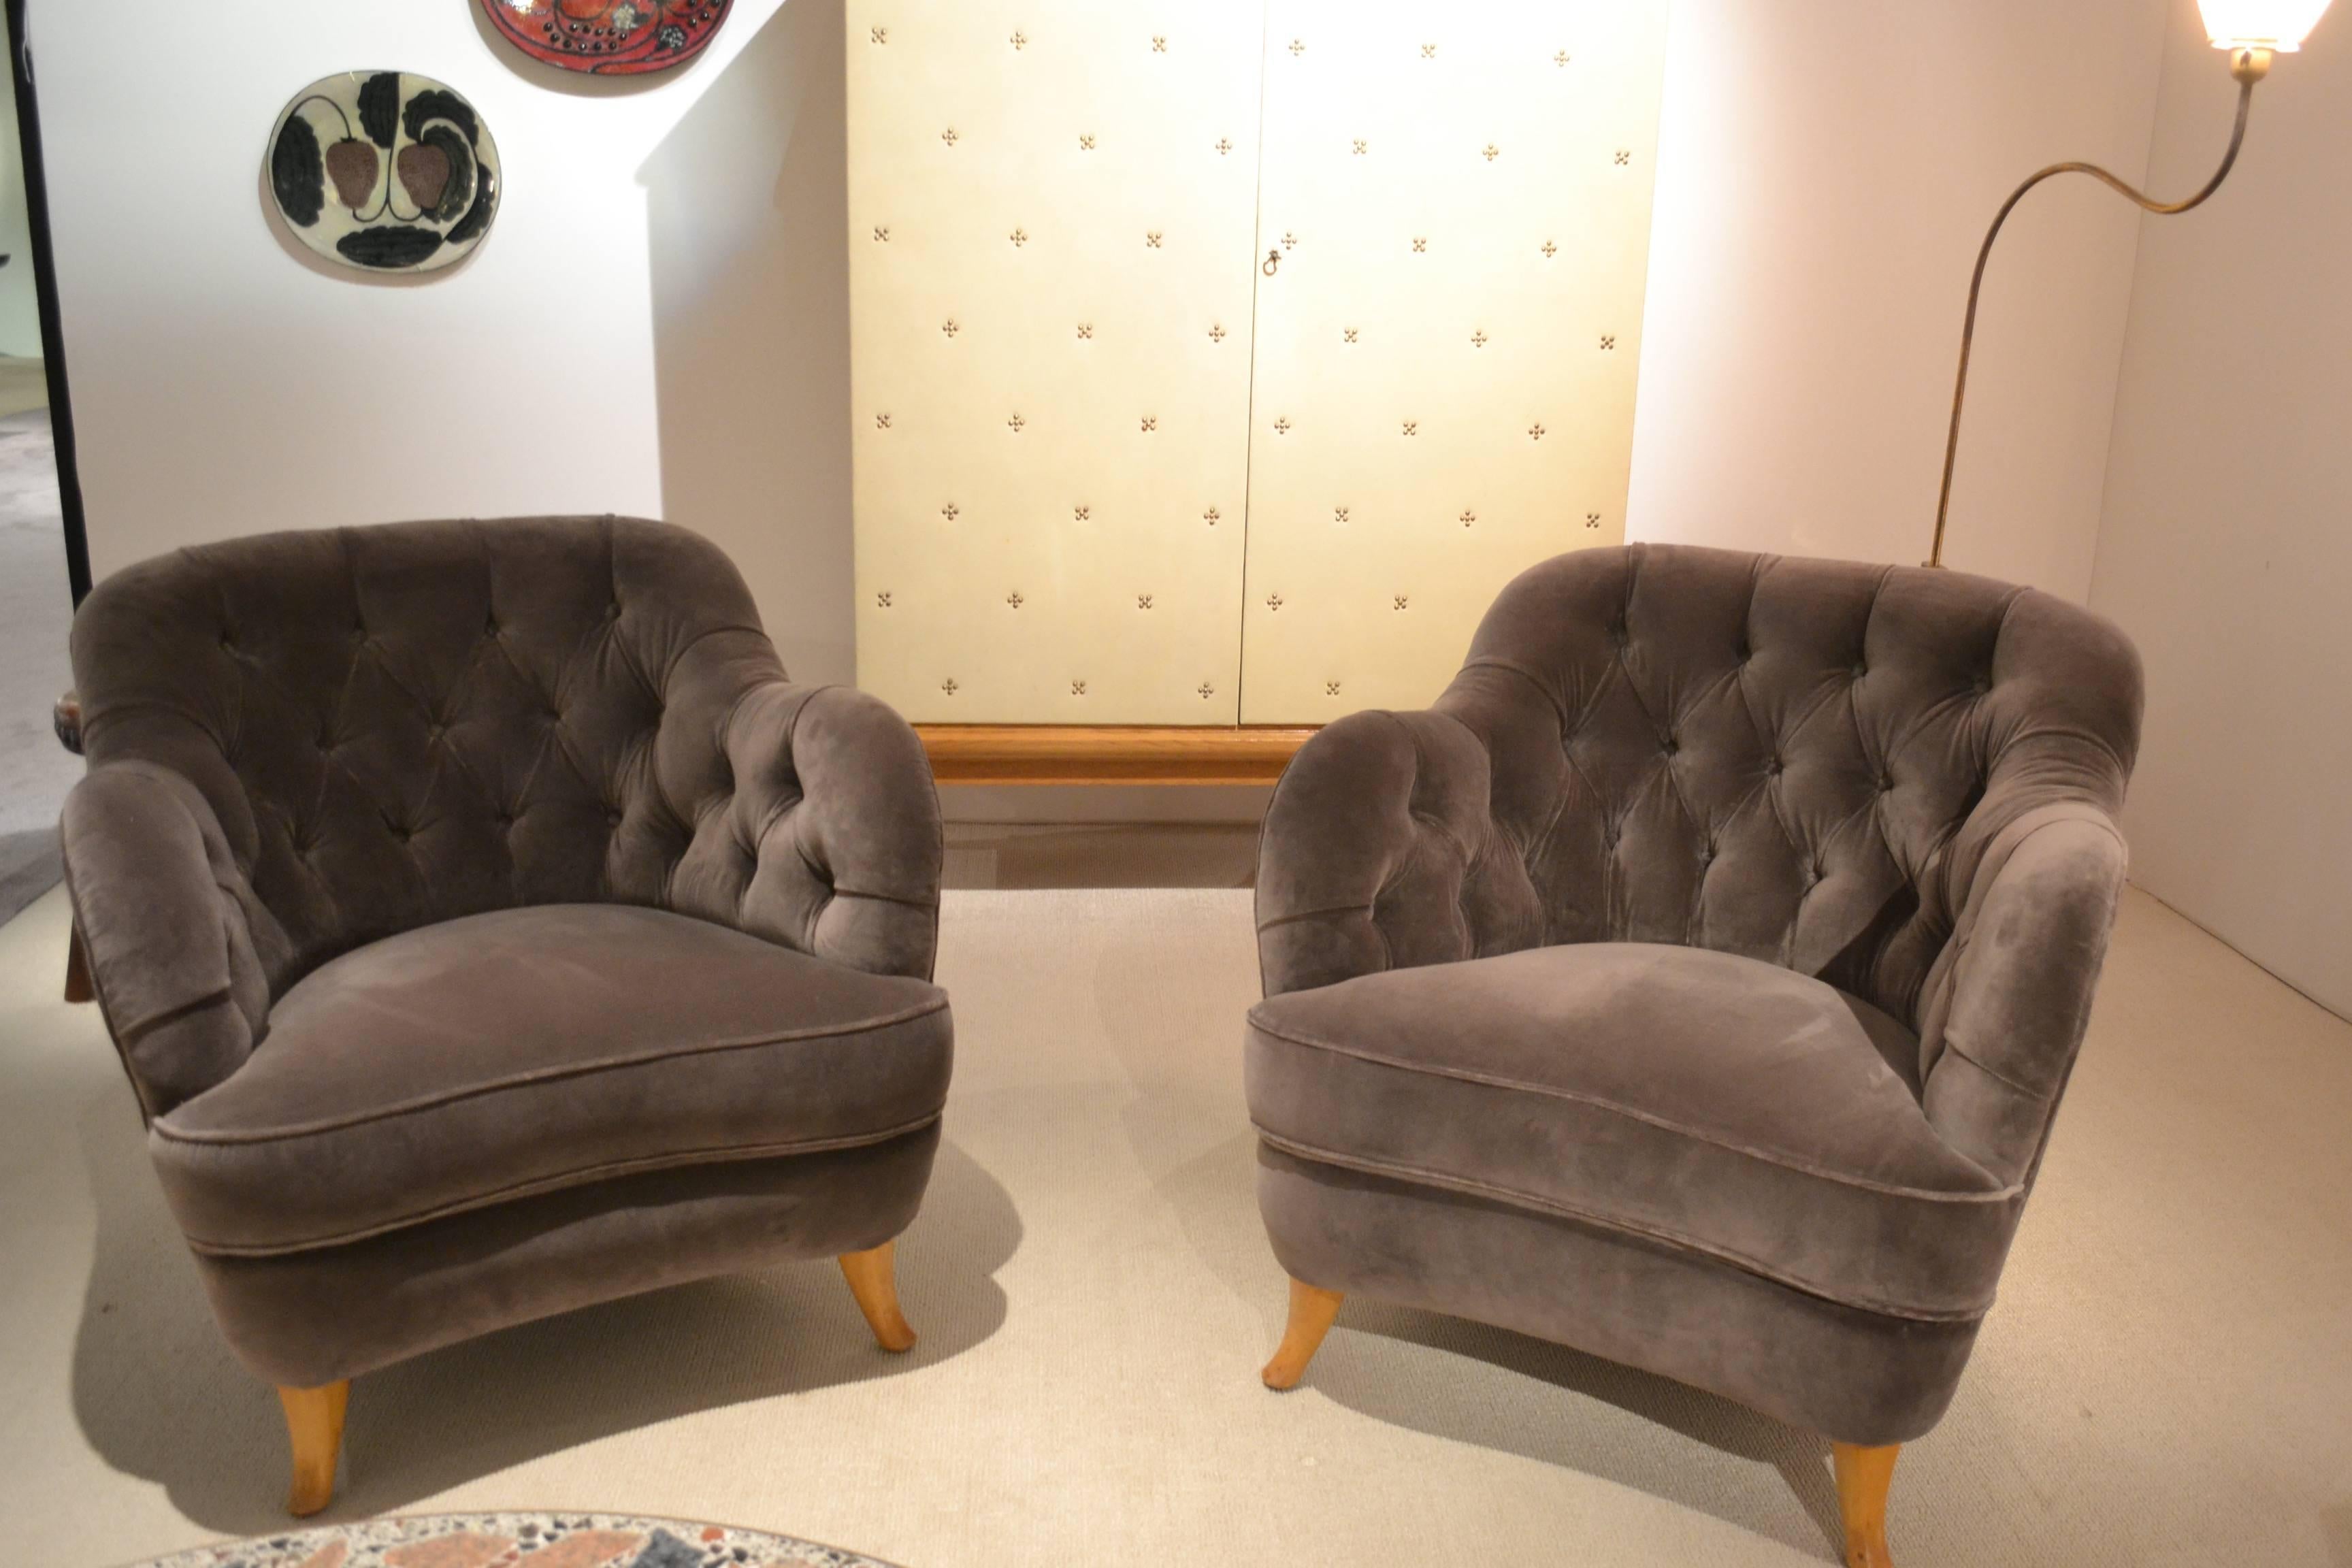 Elias Svedberg,
pair of lounge chairs,
Sweden, circa 1940.
Oak, new upholstery.
Measures: 32” W x 34” D x 29.5” H at back.
Seat 17” H.